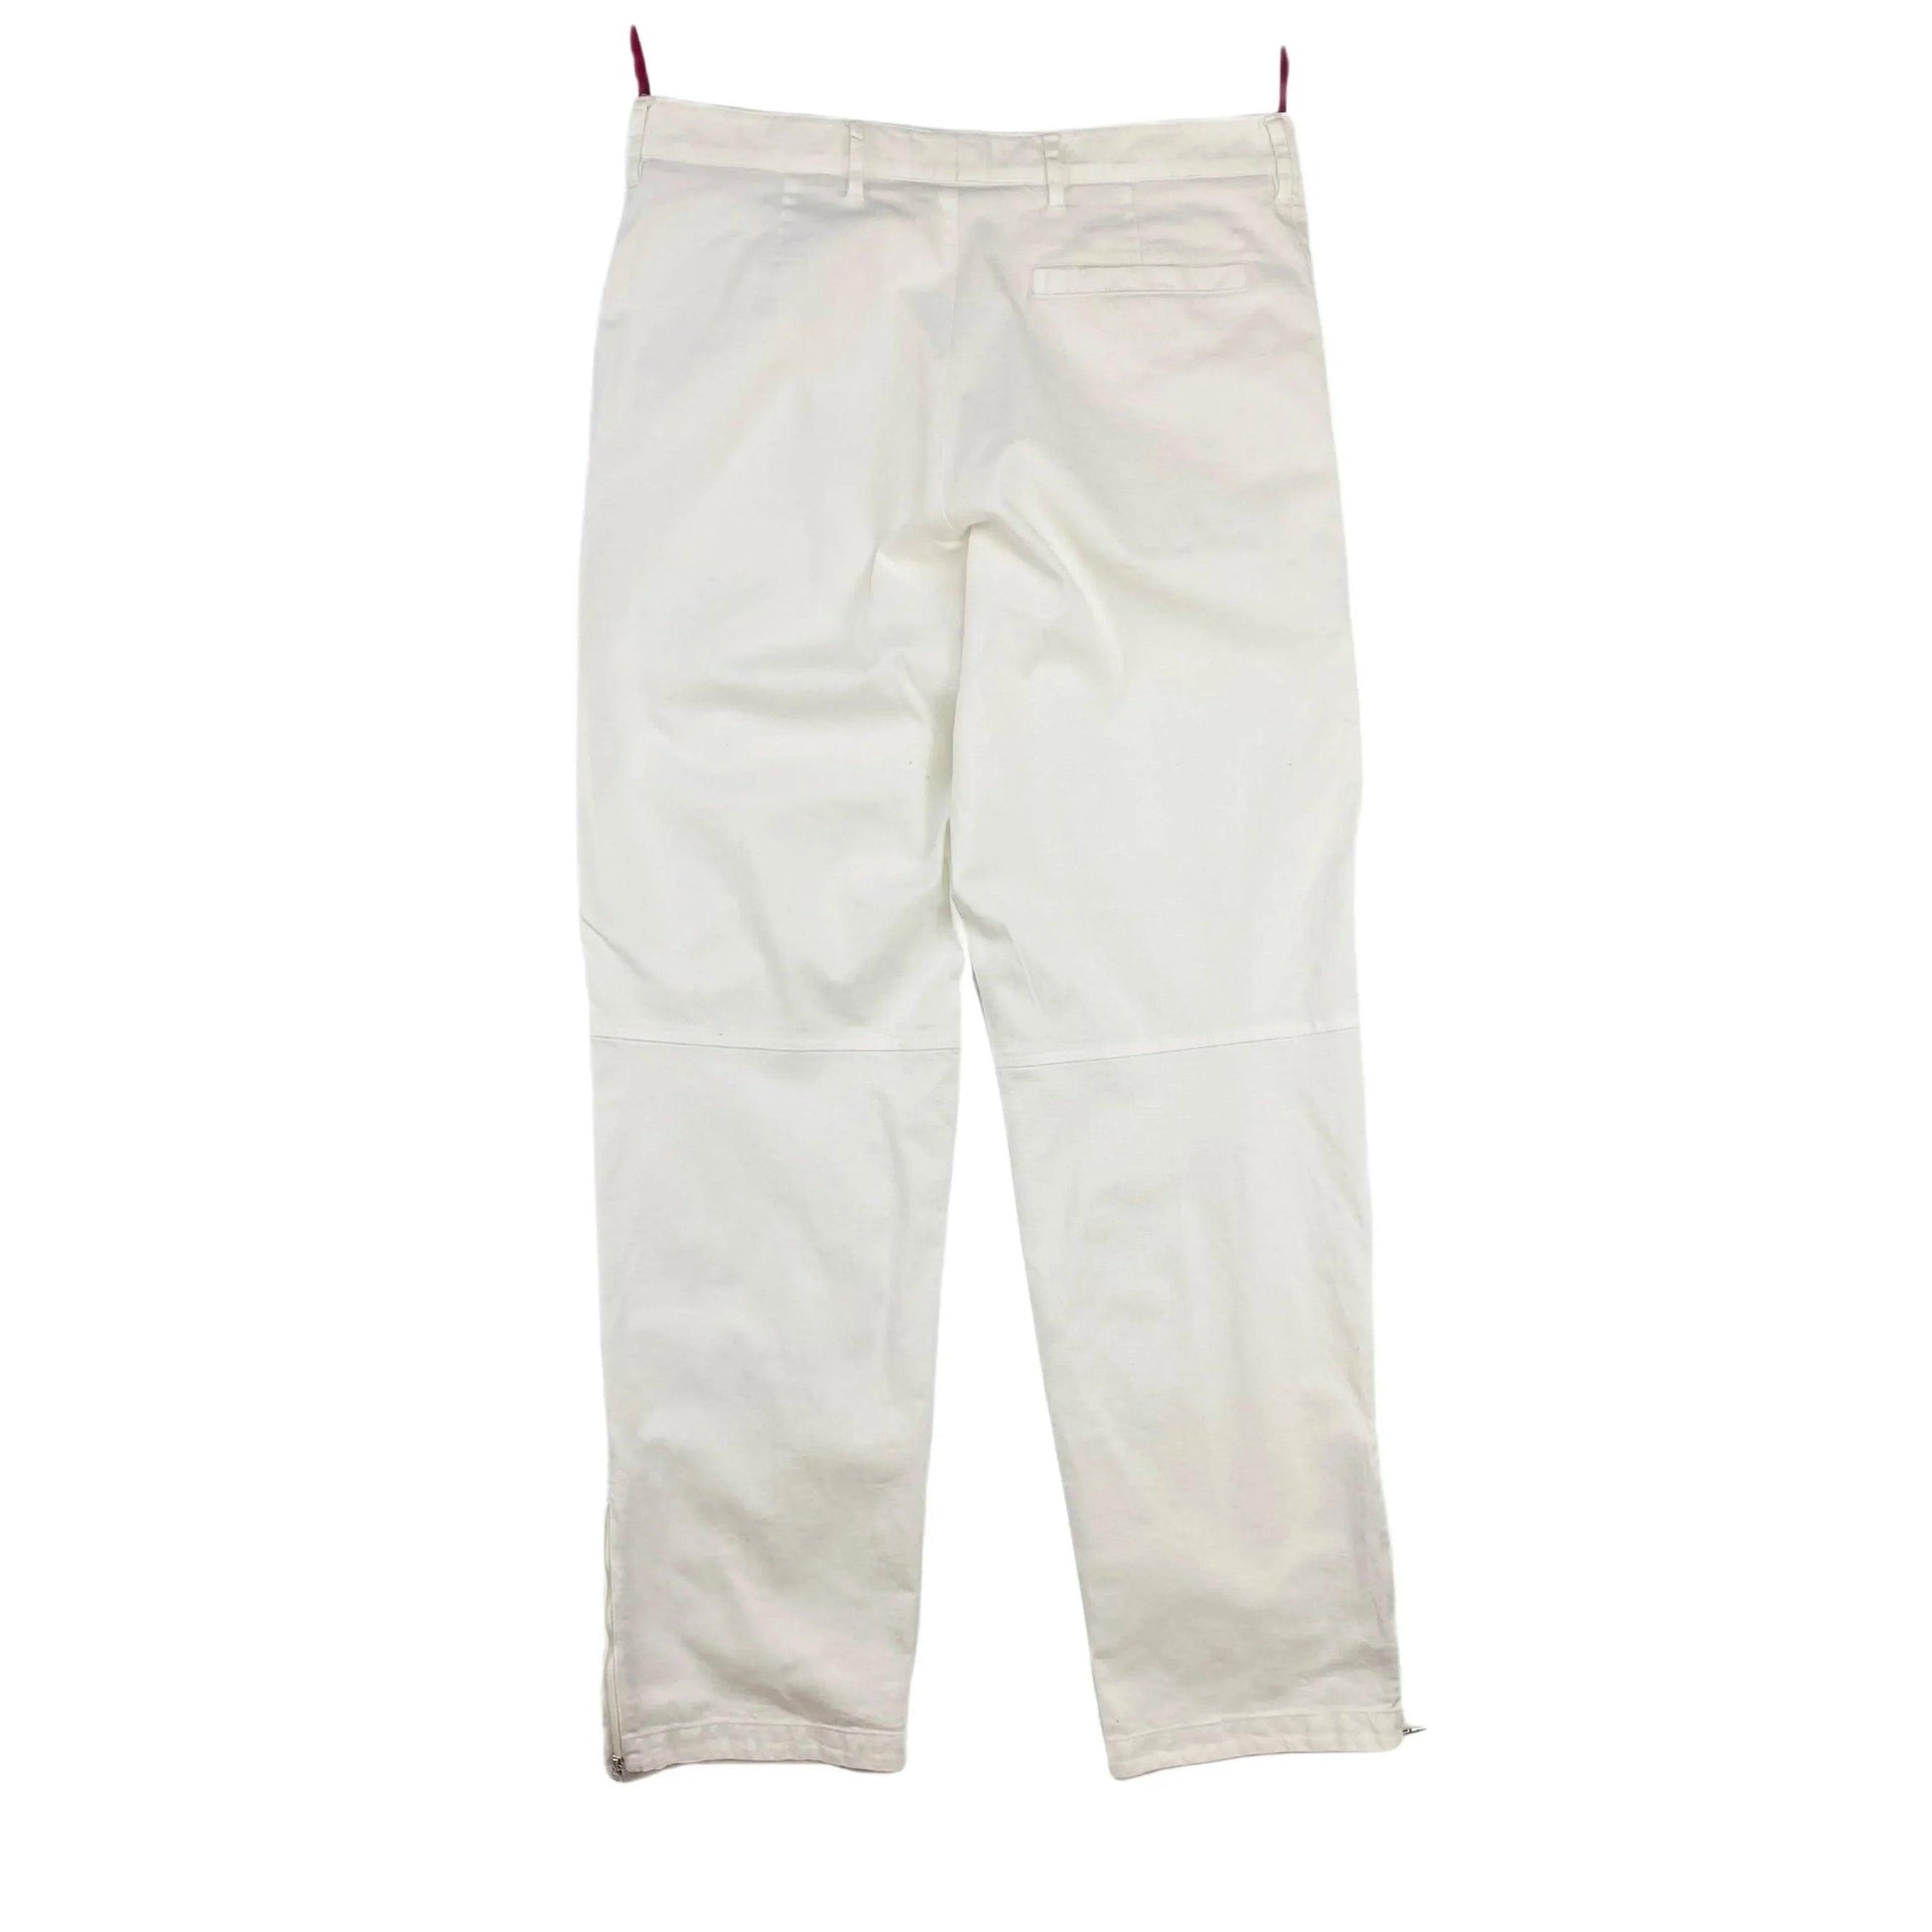 PRADA SPORT 2000S WHITE TECHNICAL TROUSERS - Known Source